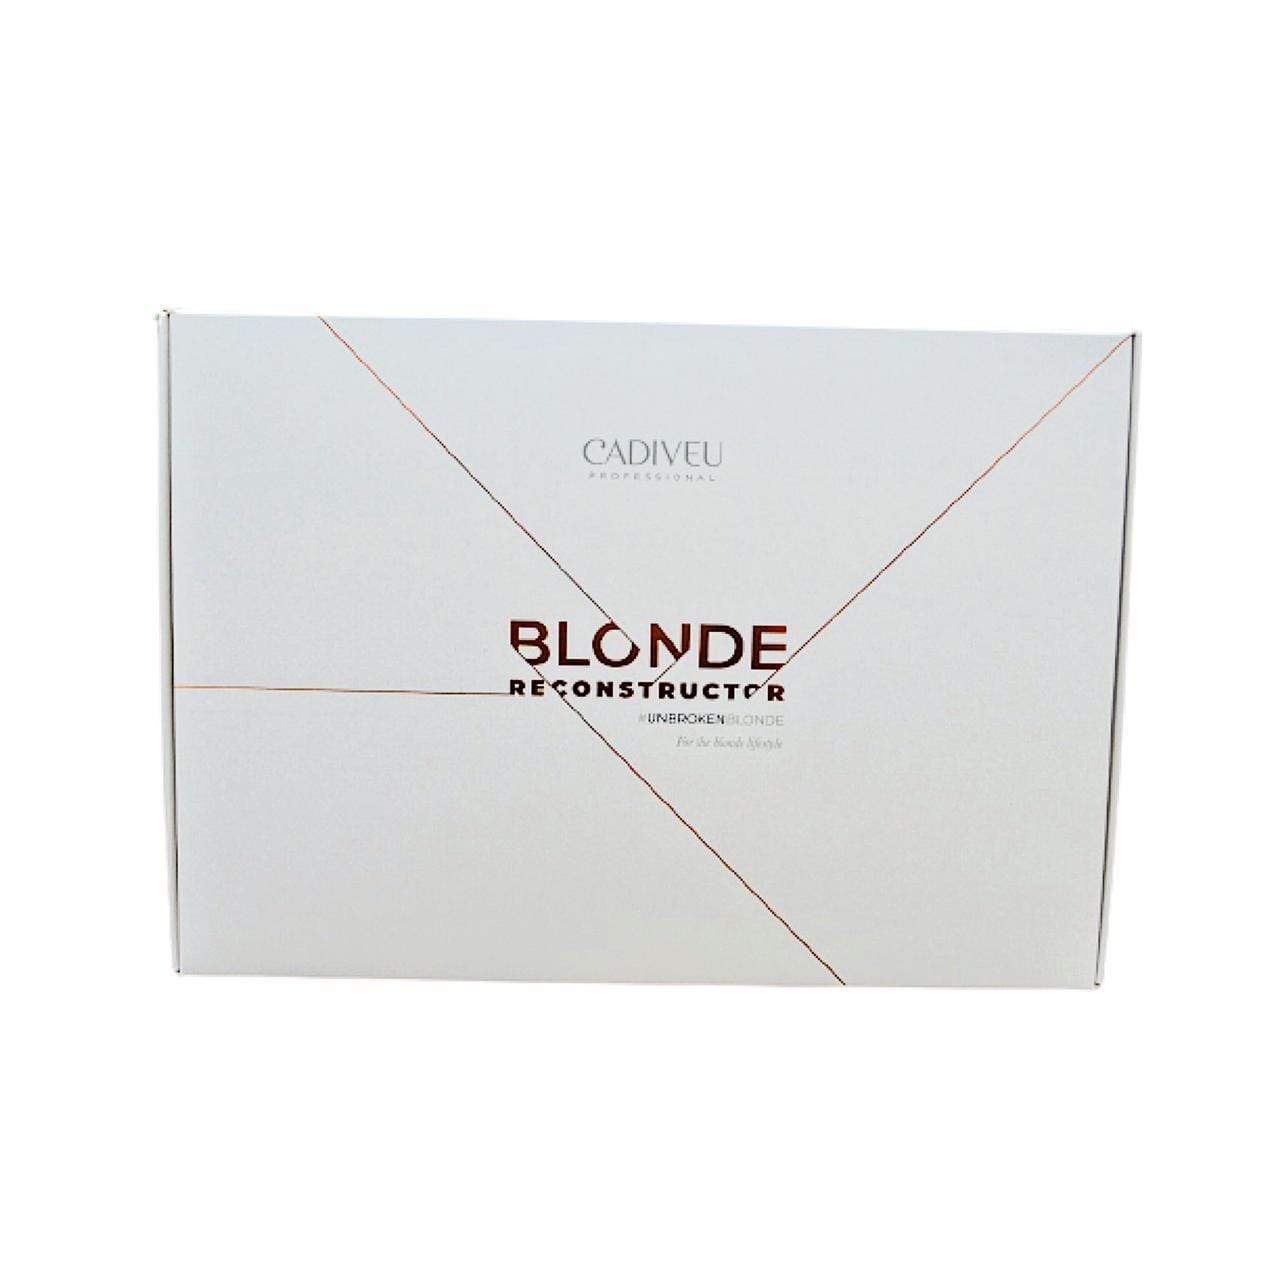 Cadiveu Blonde Reconstructor 1 x 4-in-1 Home Care Kit